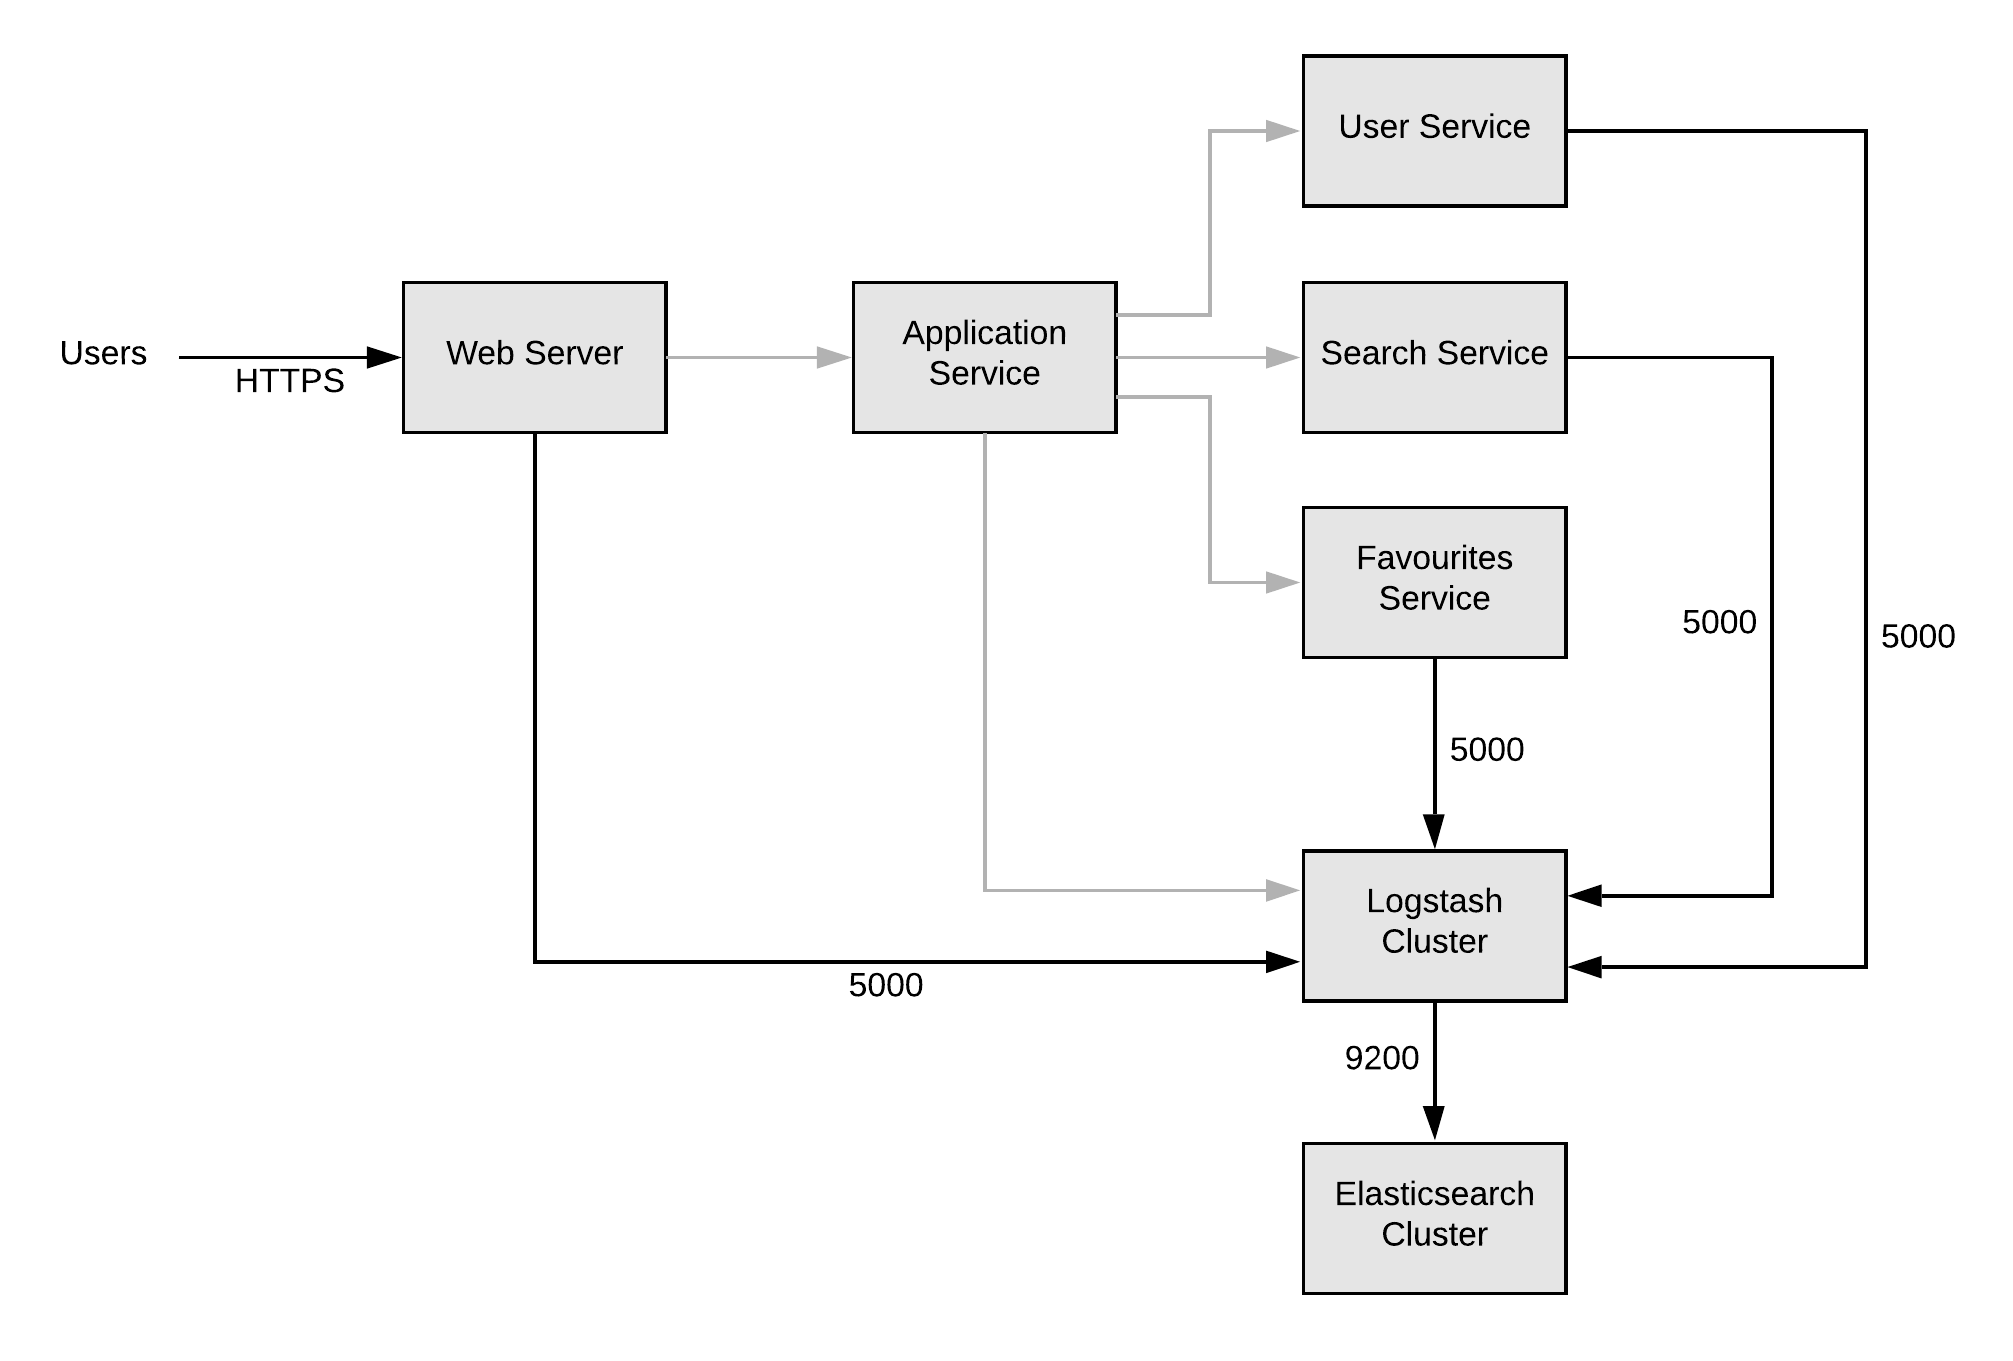 diagram showing web-server, application-service, user-service, search-service, favourites-service, logstash-cluster, elastic-search showing flow of logs to logstash cluster